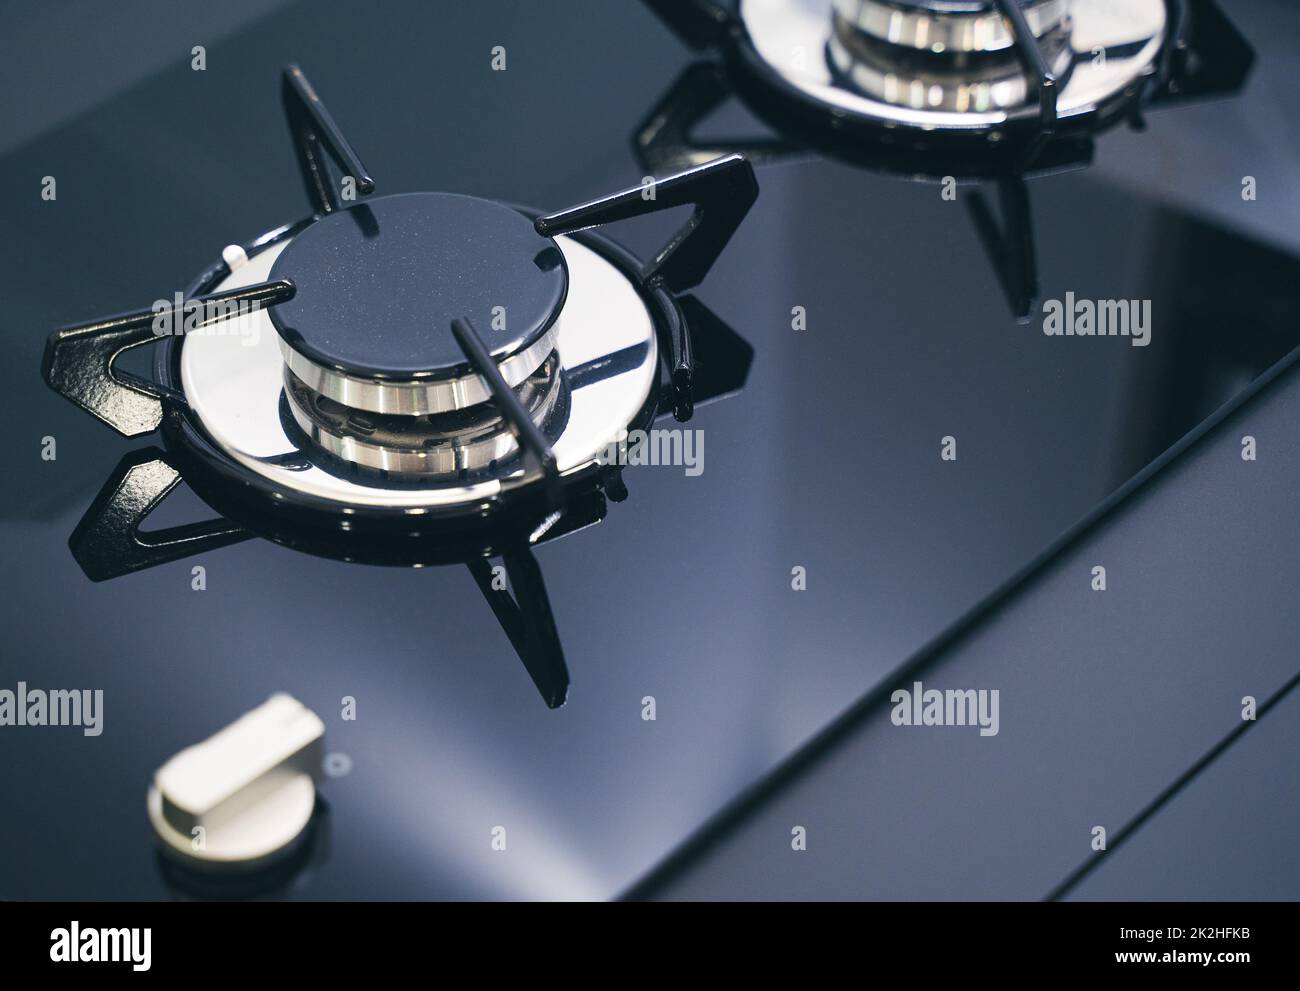 closeup of expensive black gas stove with glass and metal finish Stock Photo